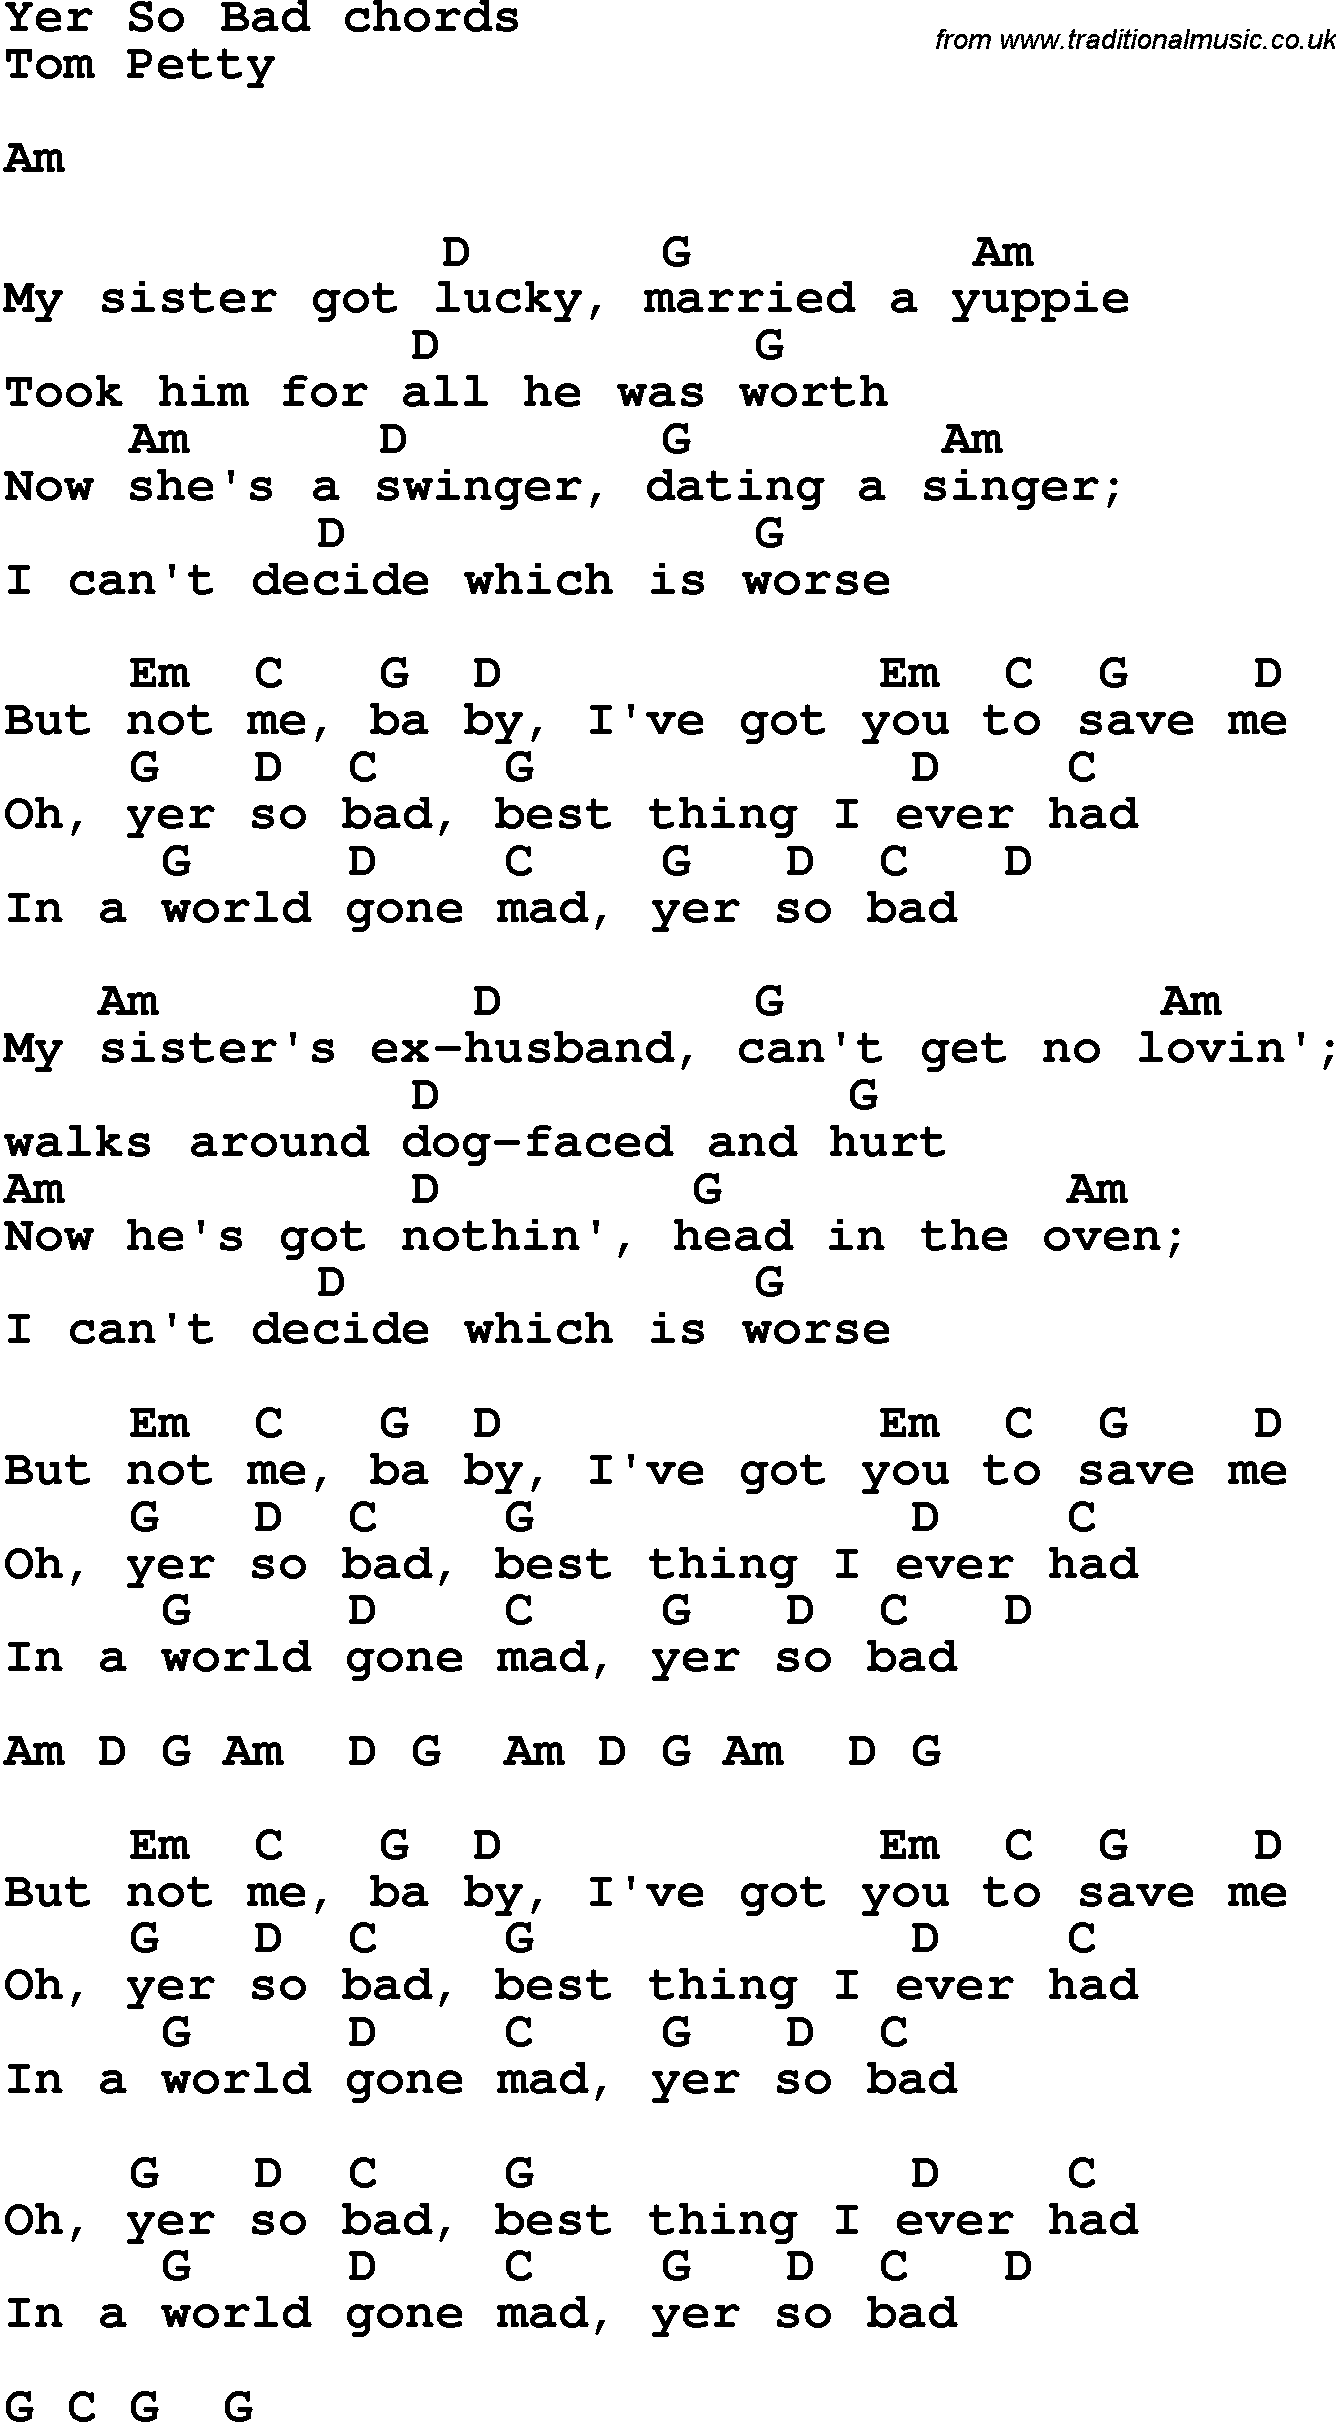 Song Lyrics with guitar chords for Yer So Bad